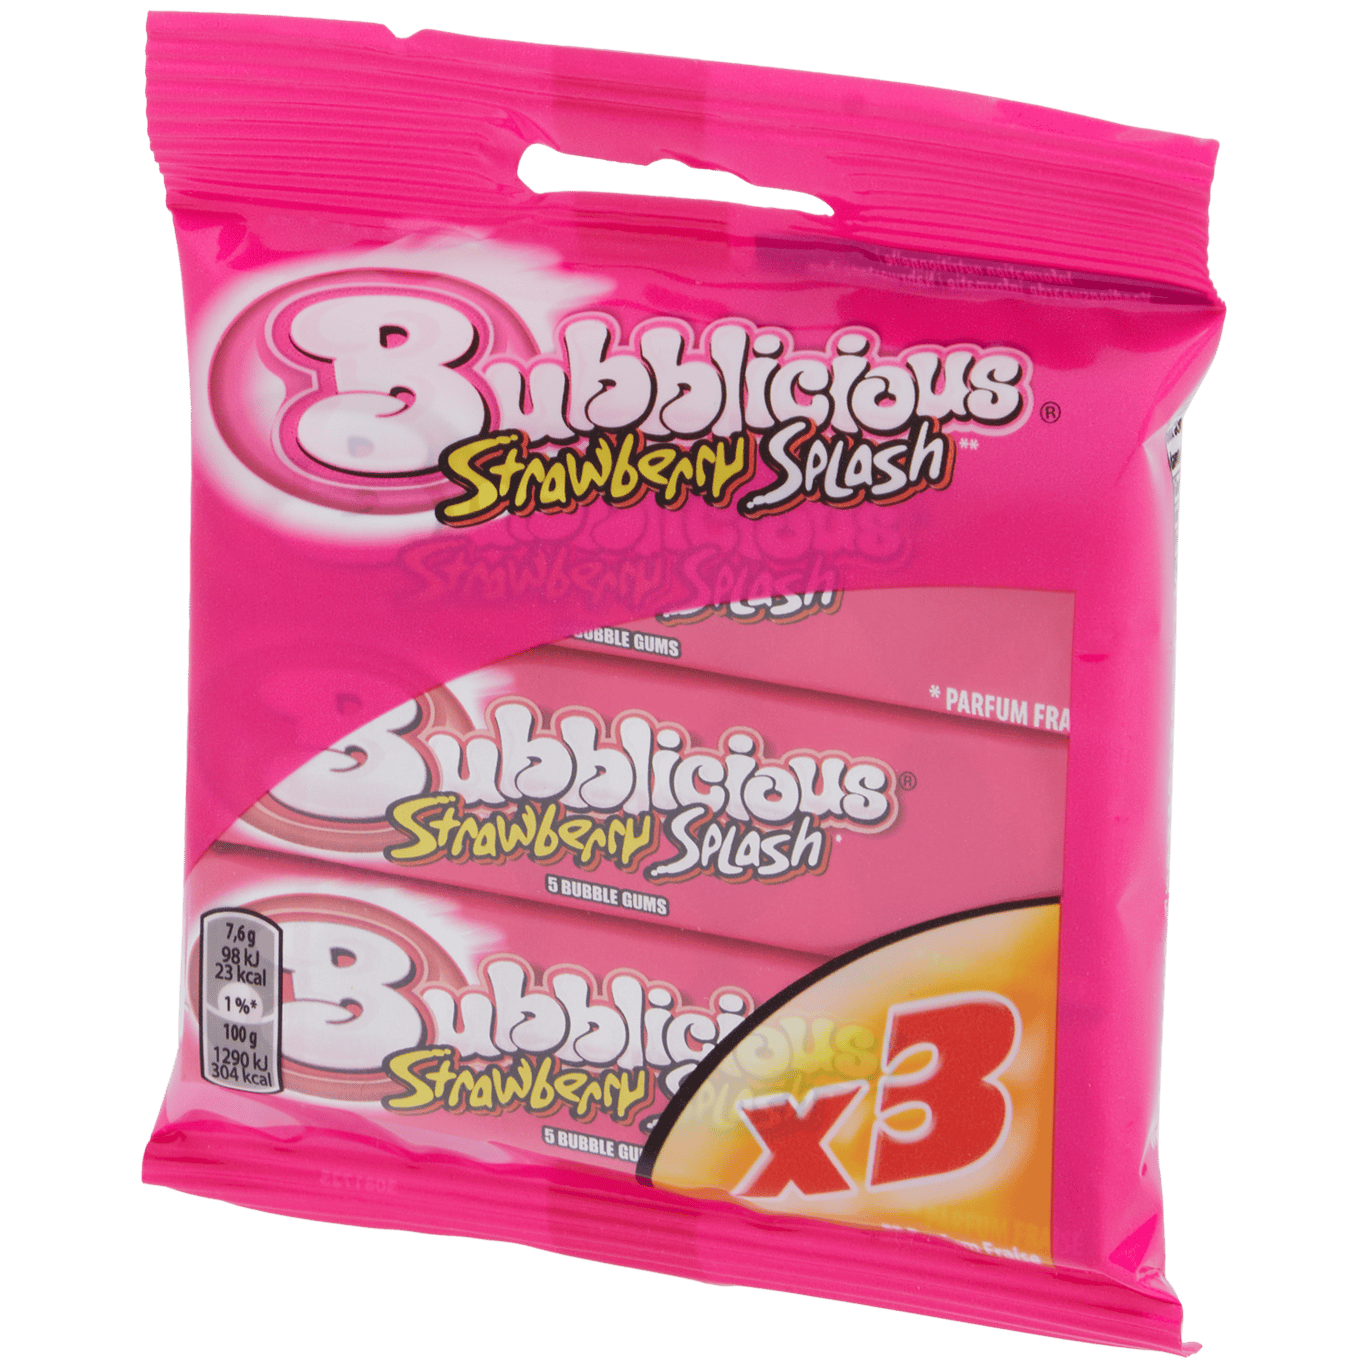 Chewing gum Bubblicious